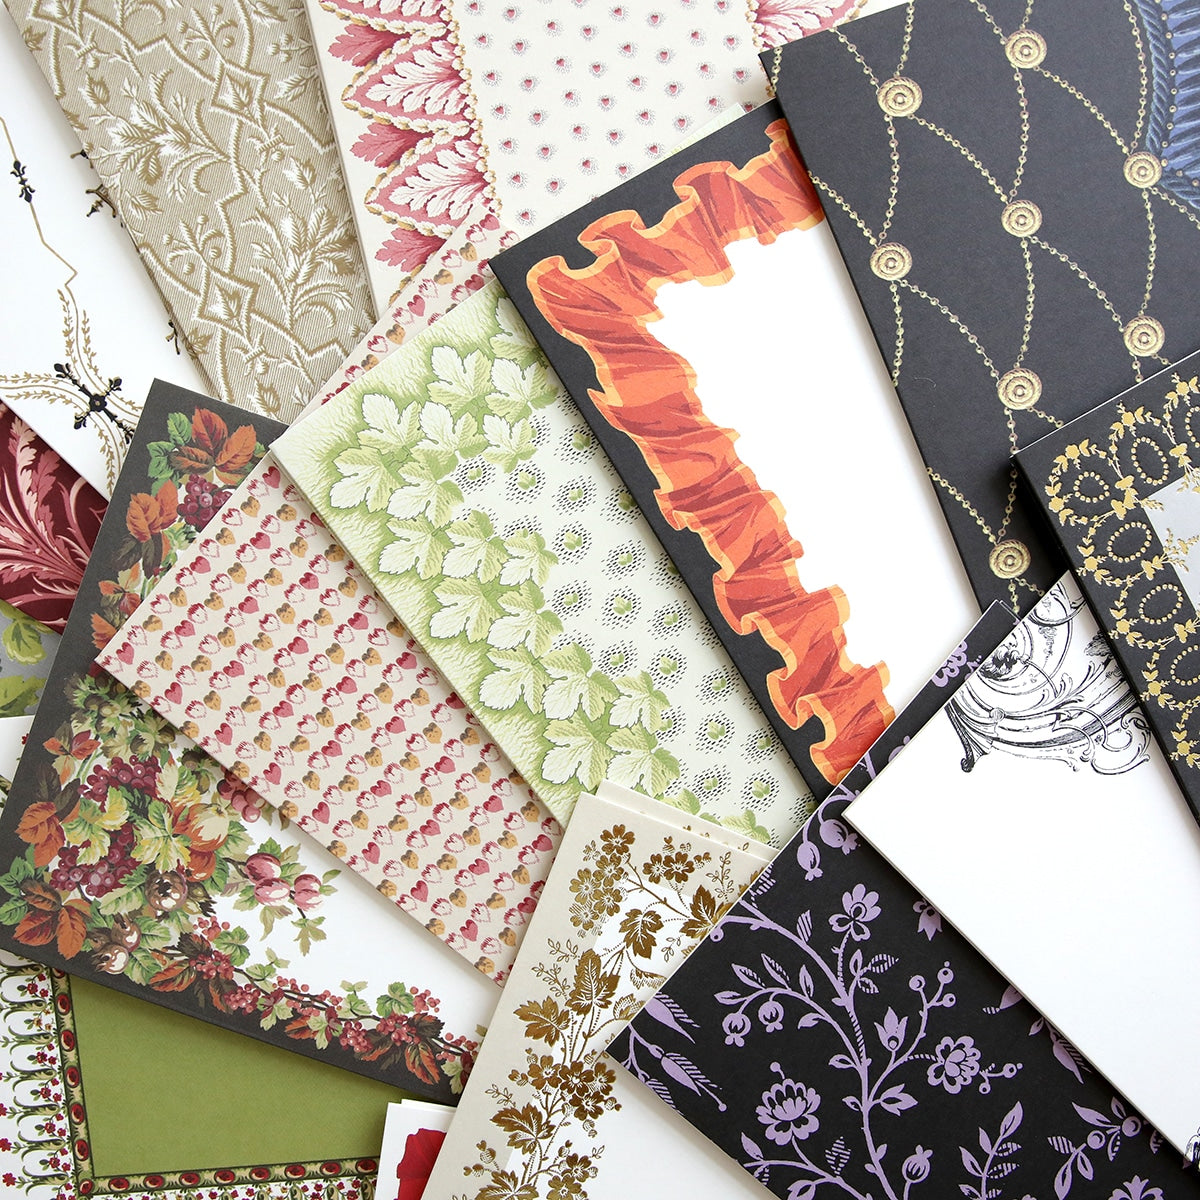 A bunch of Fall Pattern Cards and Envelopes with different designs on them.